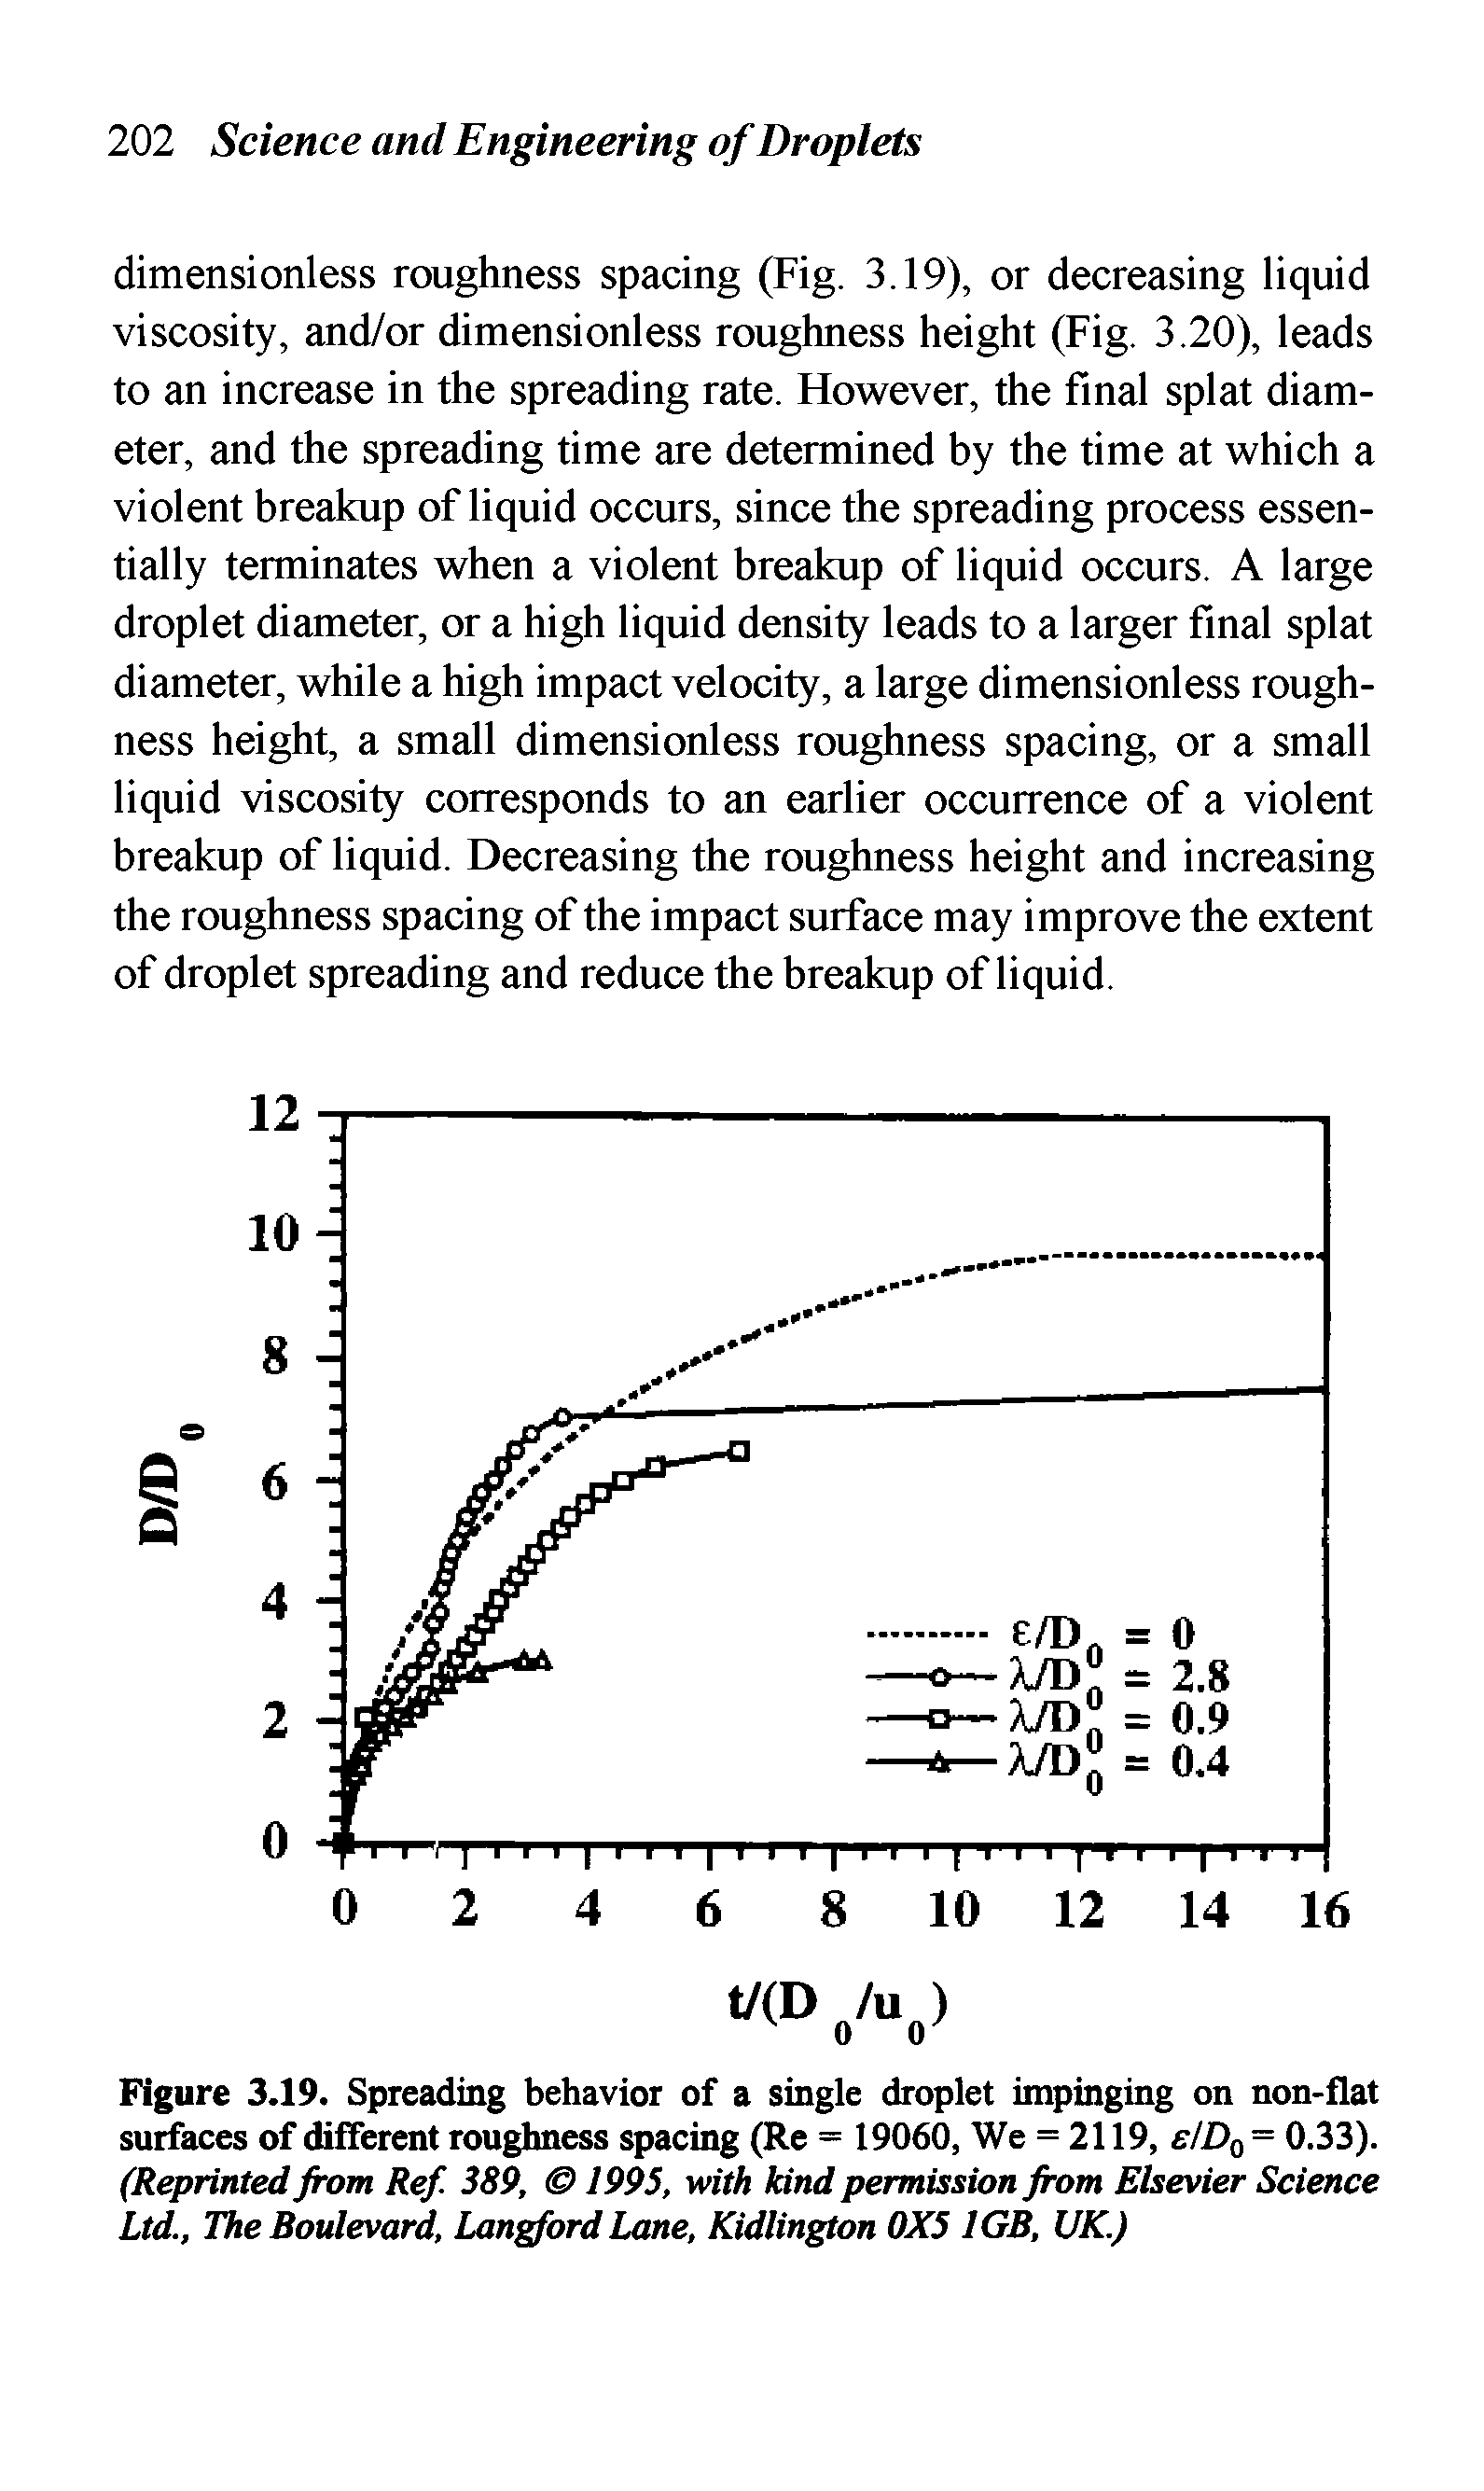 Figure 3.19. Spreading behavior of a single droplet impinging on non-flat surfaces of different roughness spacing (Re = 19060, We = 2119, e/D0 = 0.33). (Reprinted from Ref. 389, 1995, with kind permission from Elsevier Science Ltd., The Boulevard, Langford Lane, Kidlington 0X5 1GB, UK.)...